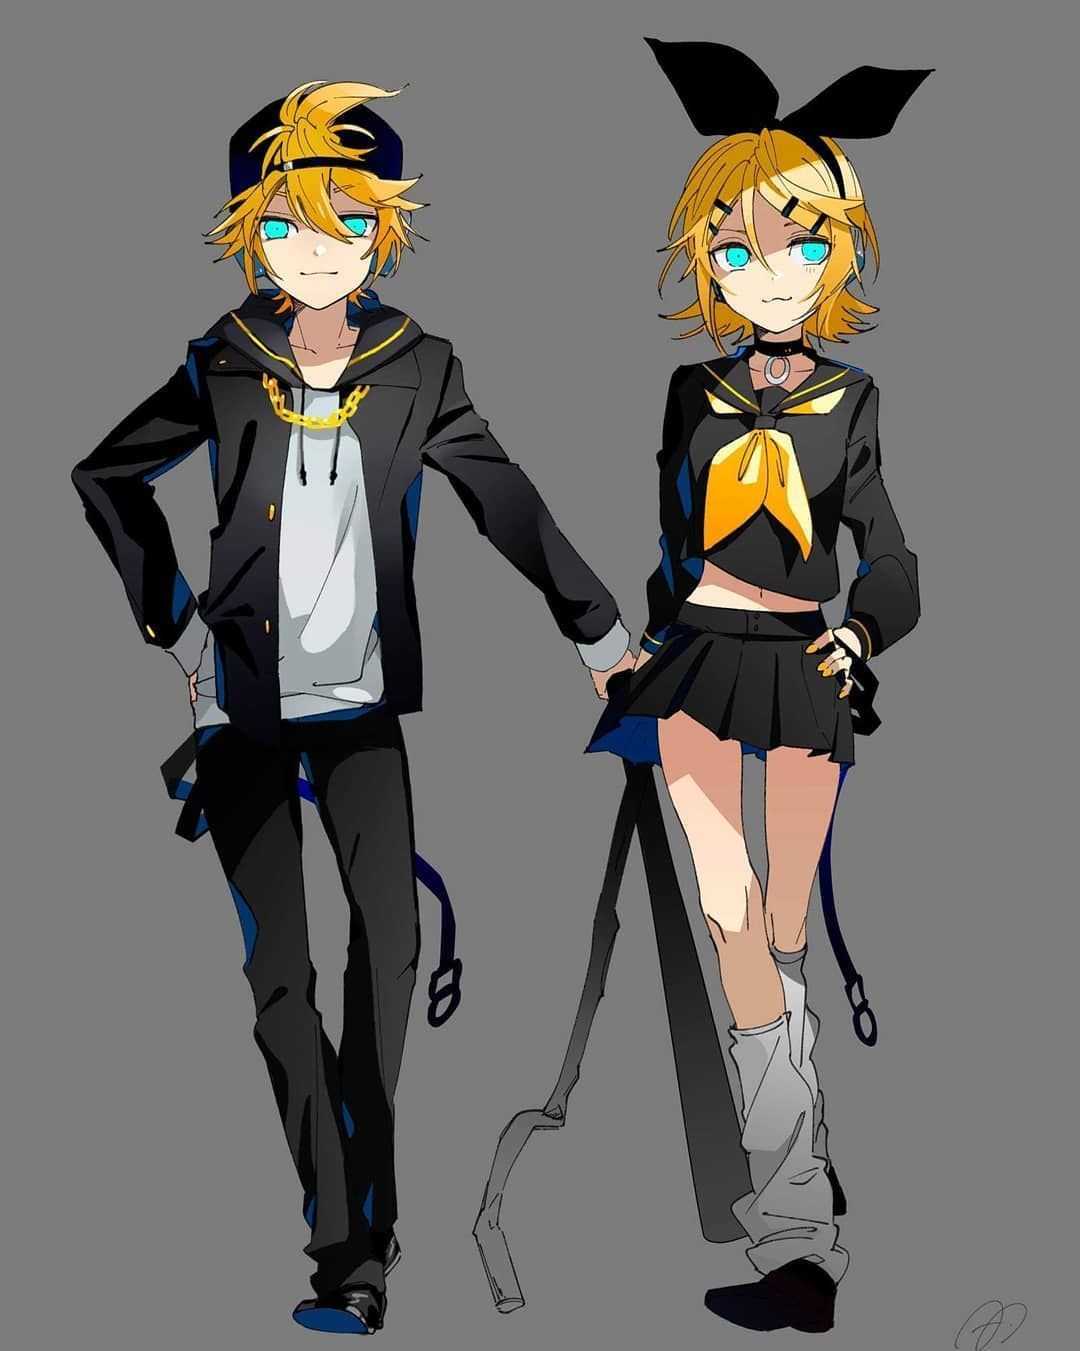 Rin and Len Kagamine, vocaloid. Rin is a male and Len is a female. - 